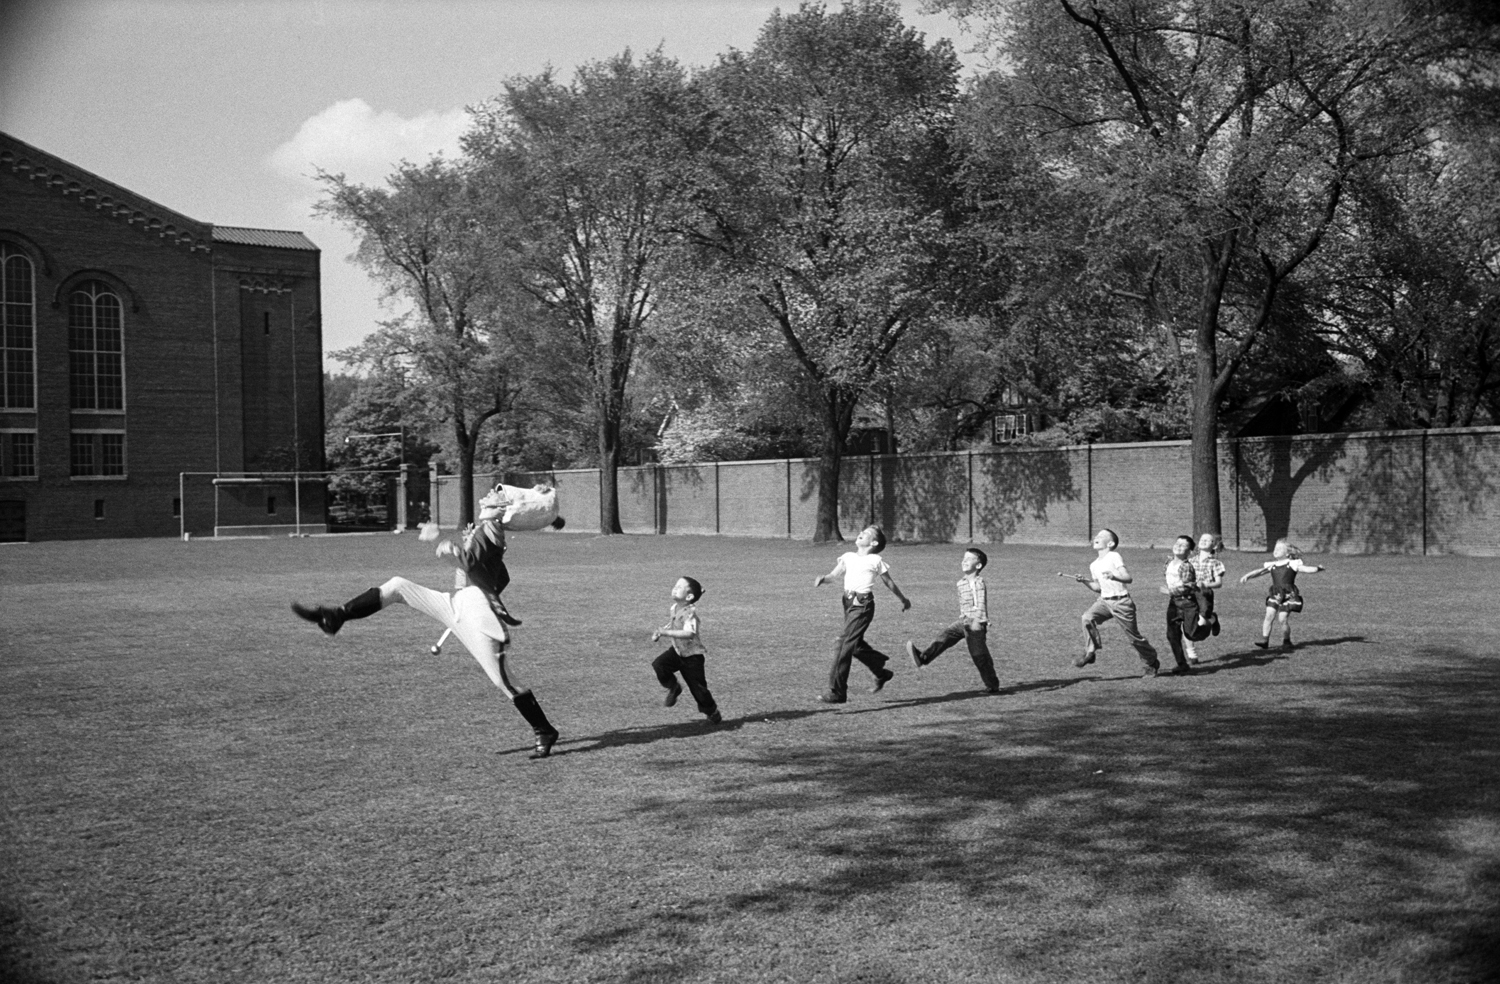 The drum major for the University of Michigan marching band high-steps as children follow suit, 1950.